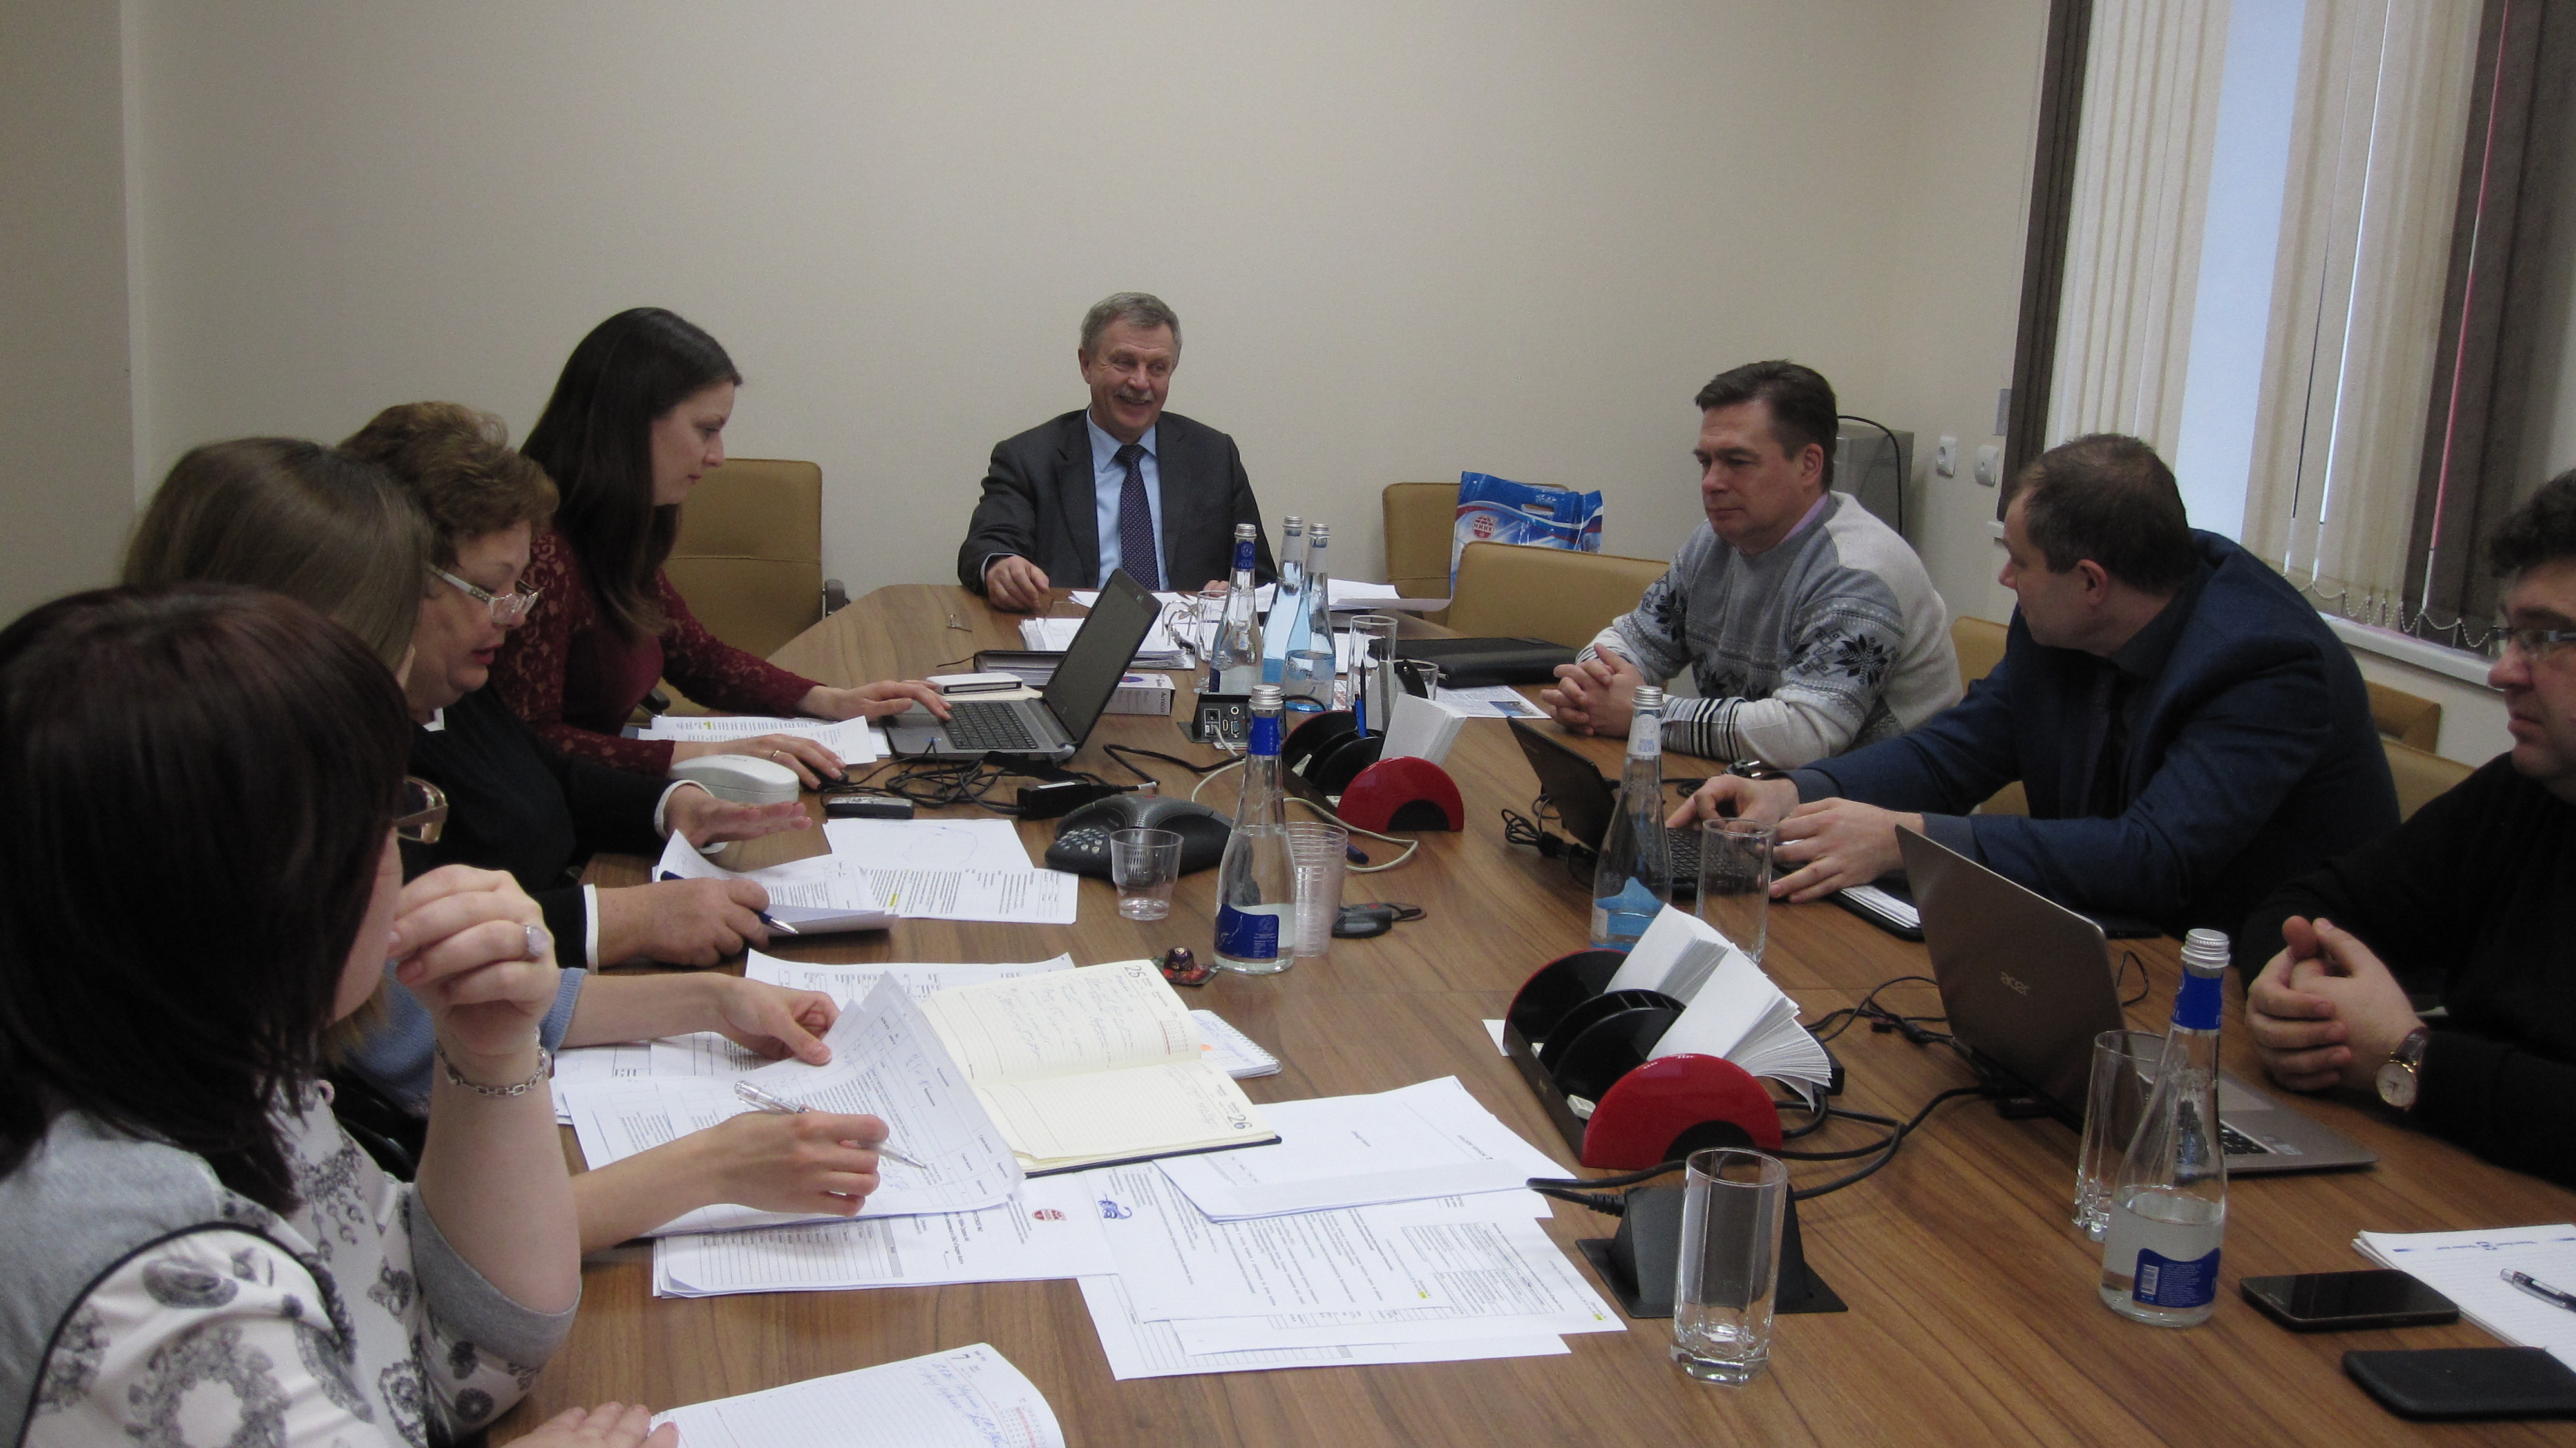 NIIK  signed an agreement  and started  evaluation of the potential of a new  project  in Grodno (Belarus)